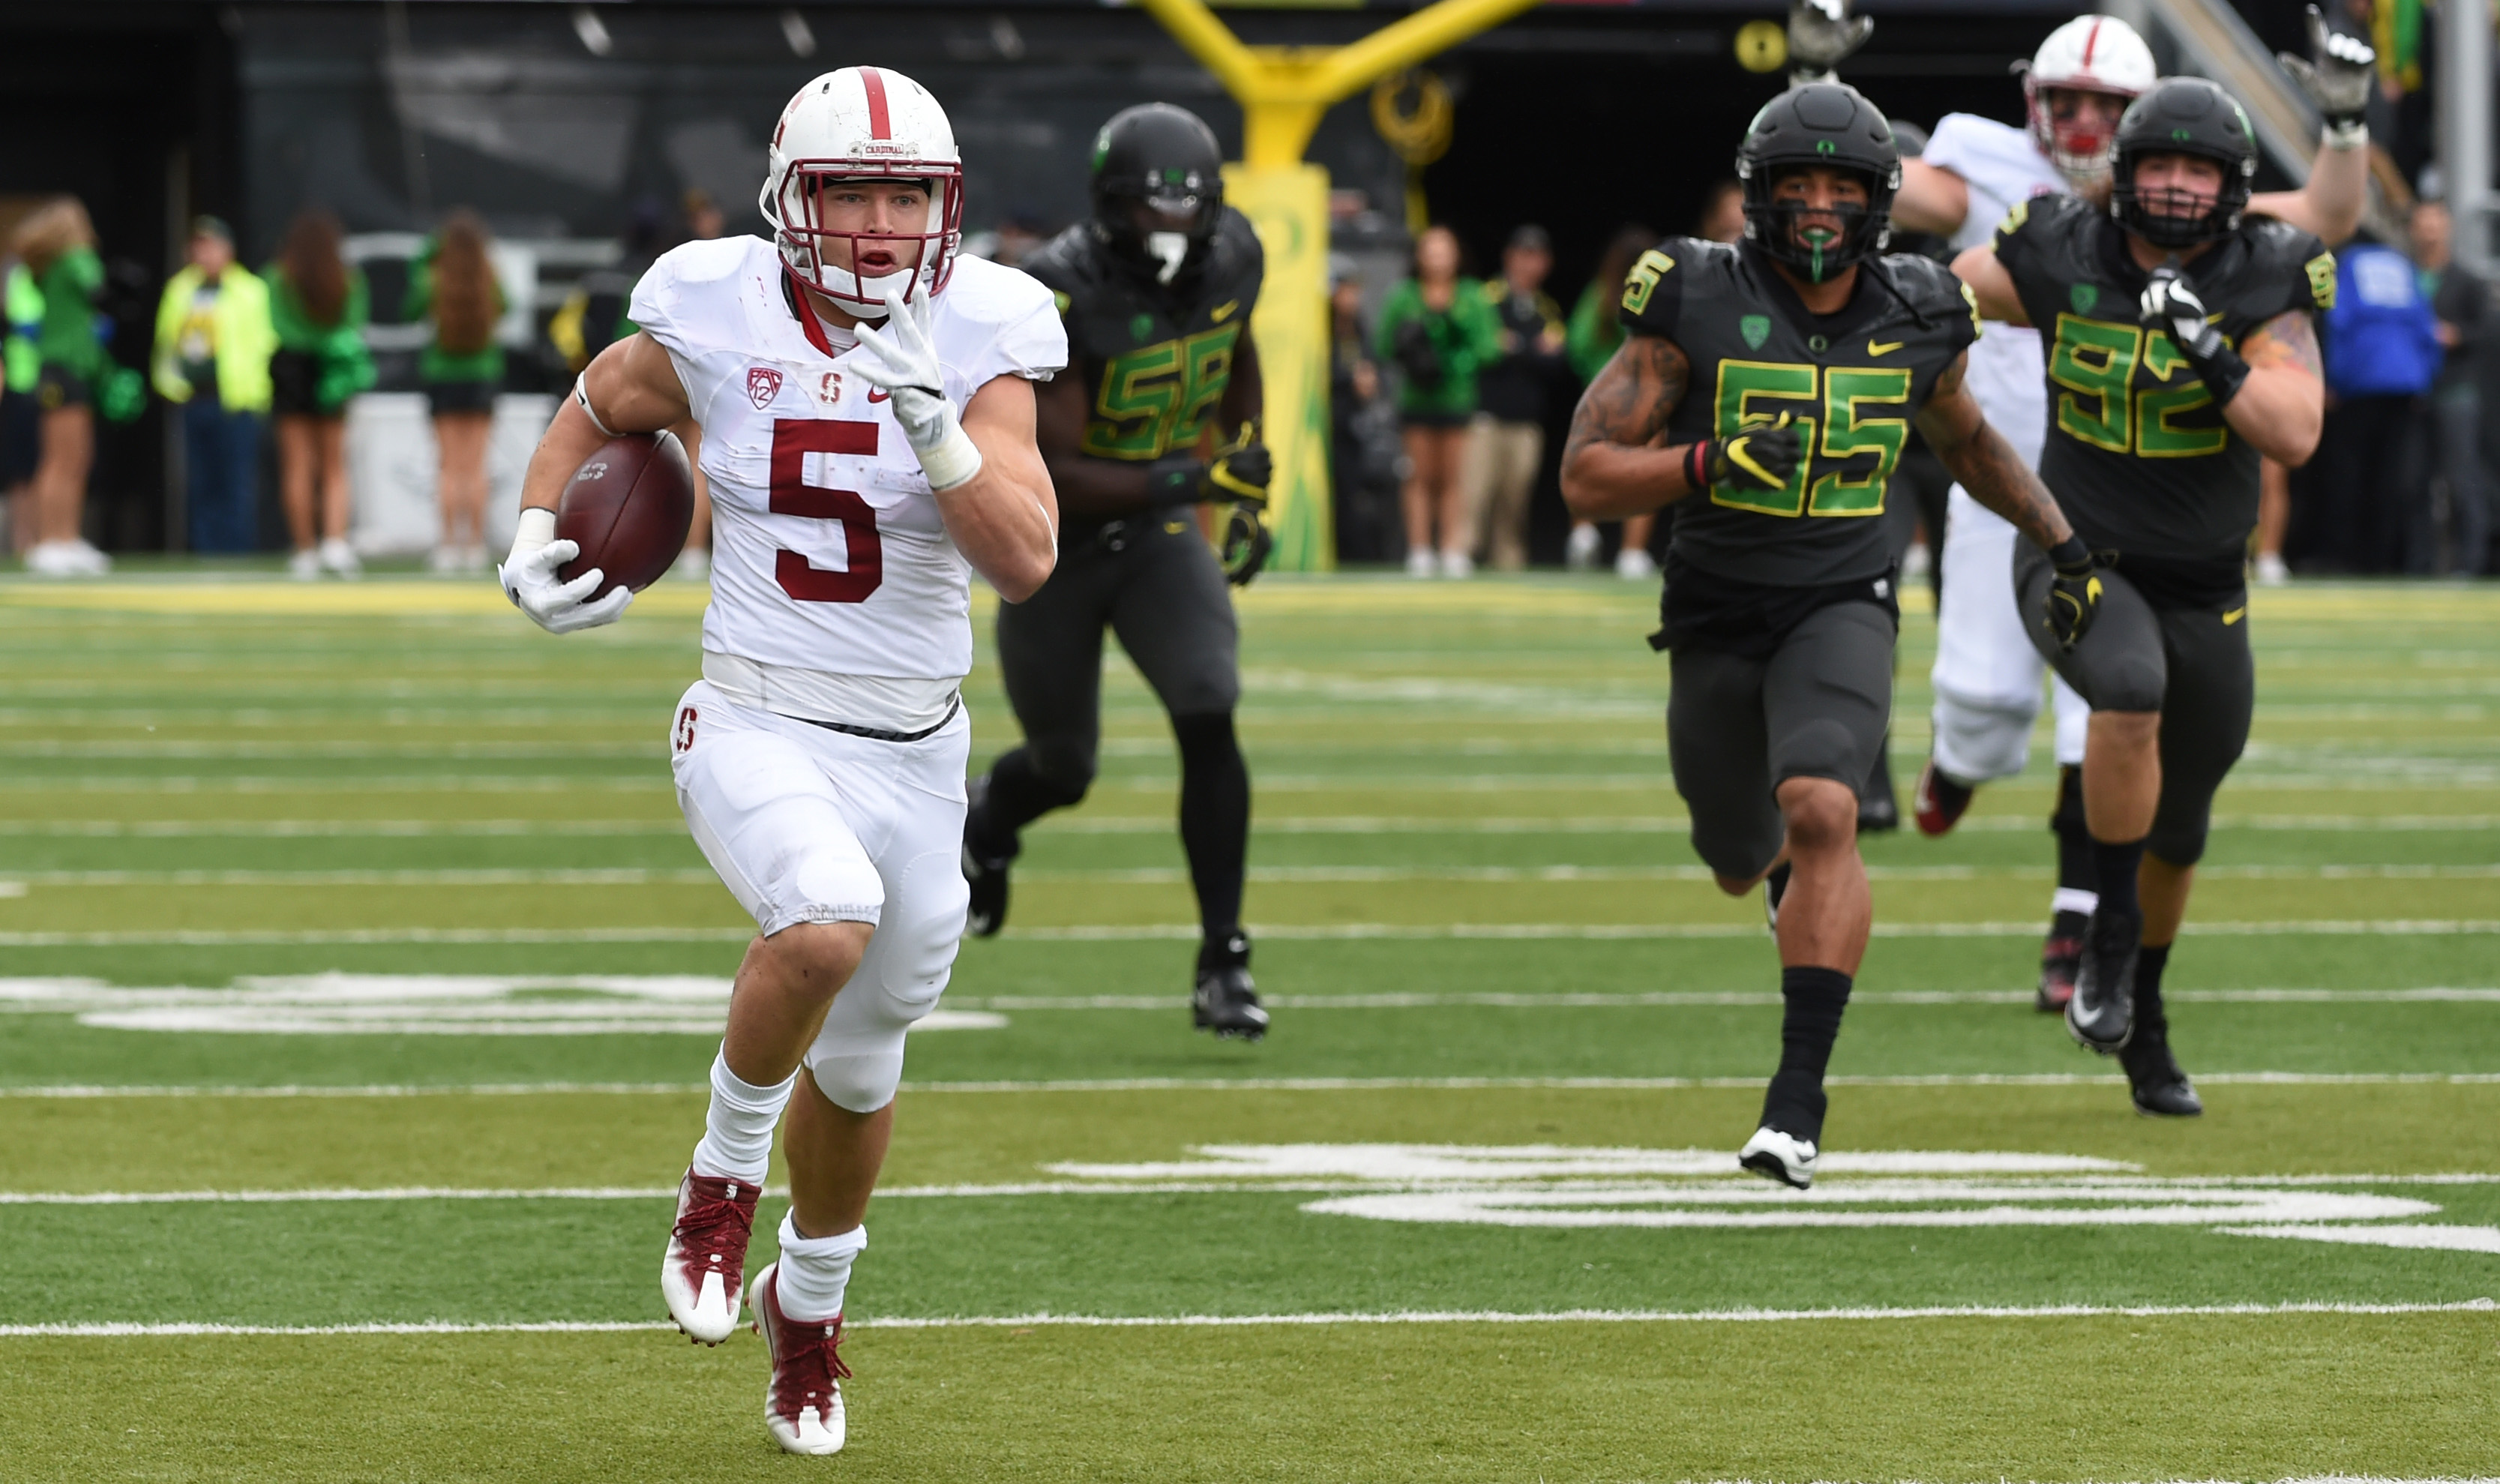 EUGENE, OR - NOVEMBER 12: Running back Christian McCaffrey #5 of the Stanford Cardinal heads for the end zone on a long touchdown run during the first quarter of the game against the Oregon Ducks at Autzen Stadium on November 12, 2016 in Eugene, Oregon.